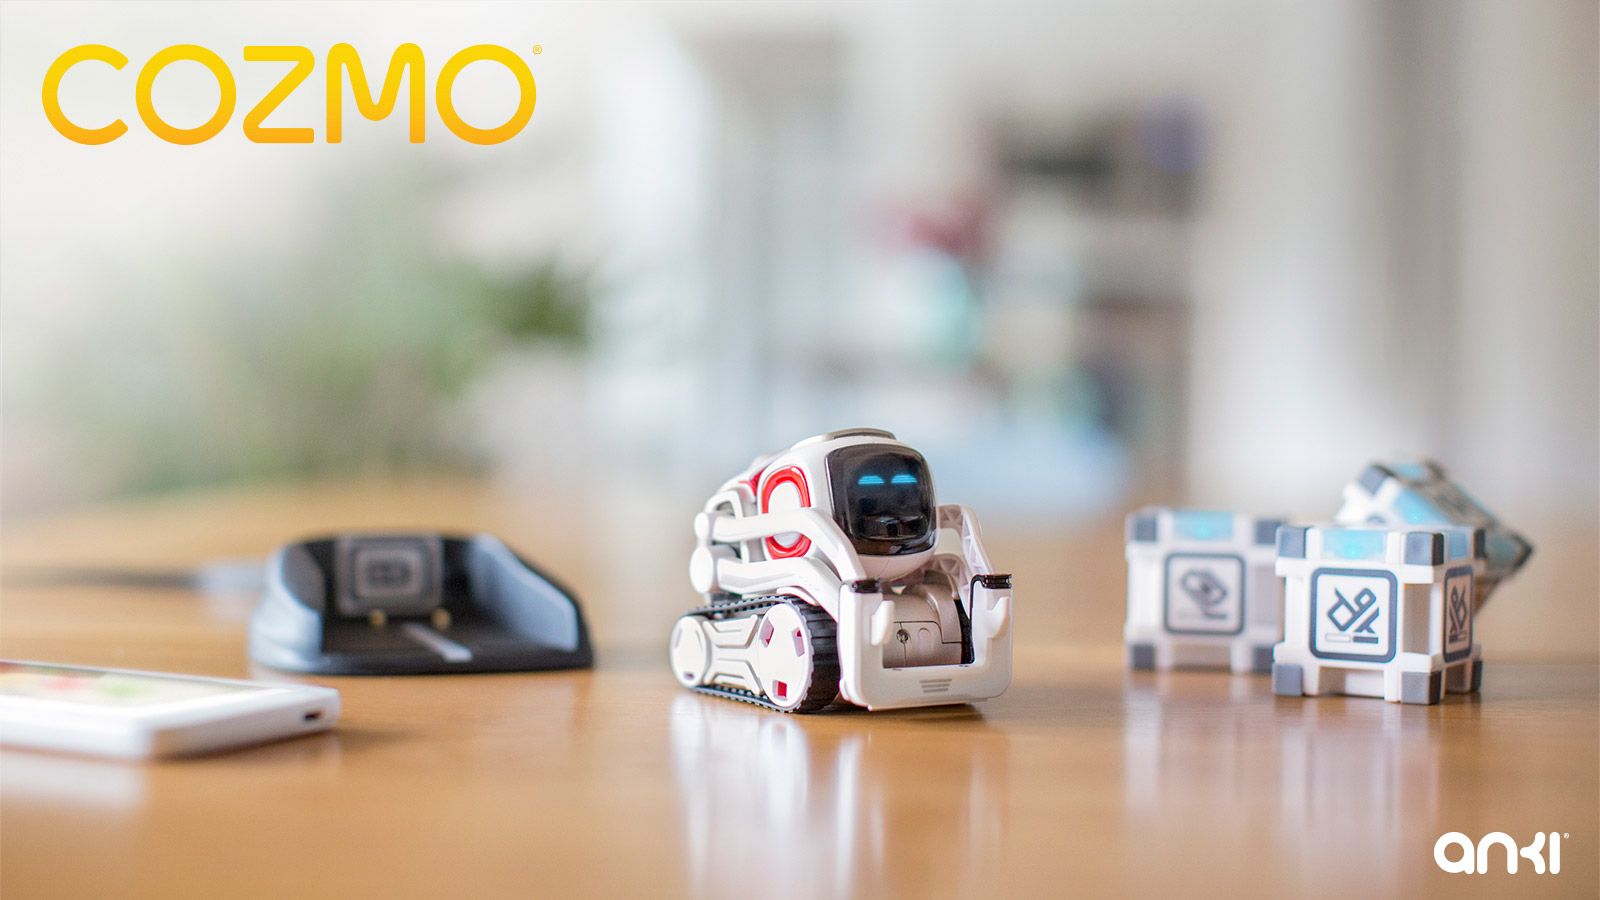 Anki's tiny emotive robot Cozmo is coming to Canada in July